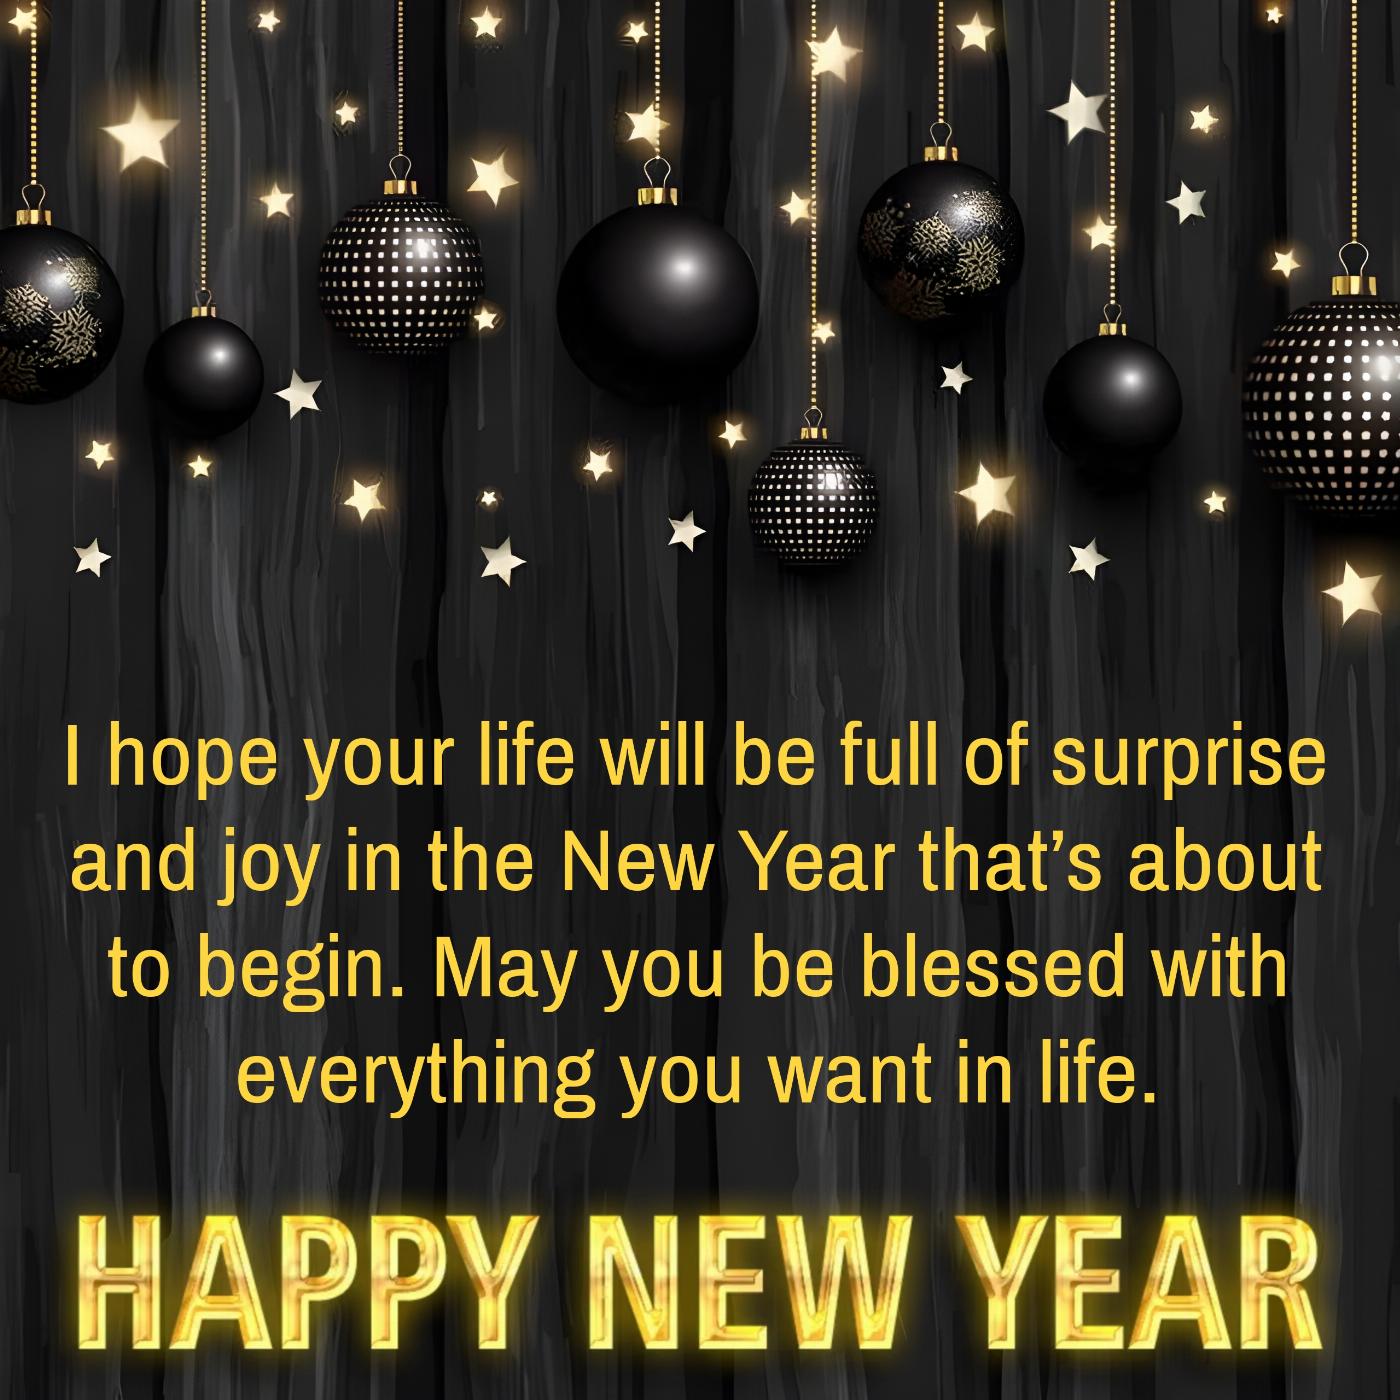 I hope your life will be full of surprise and joy